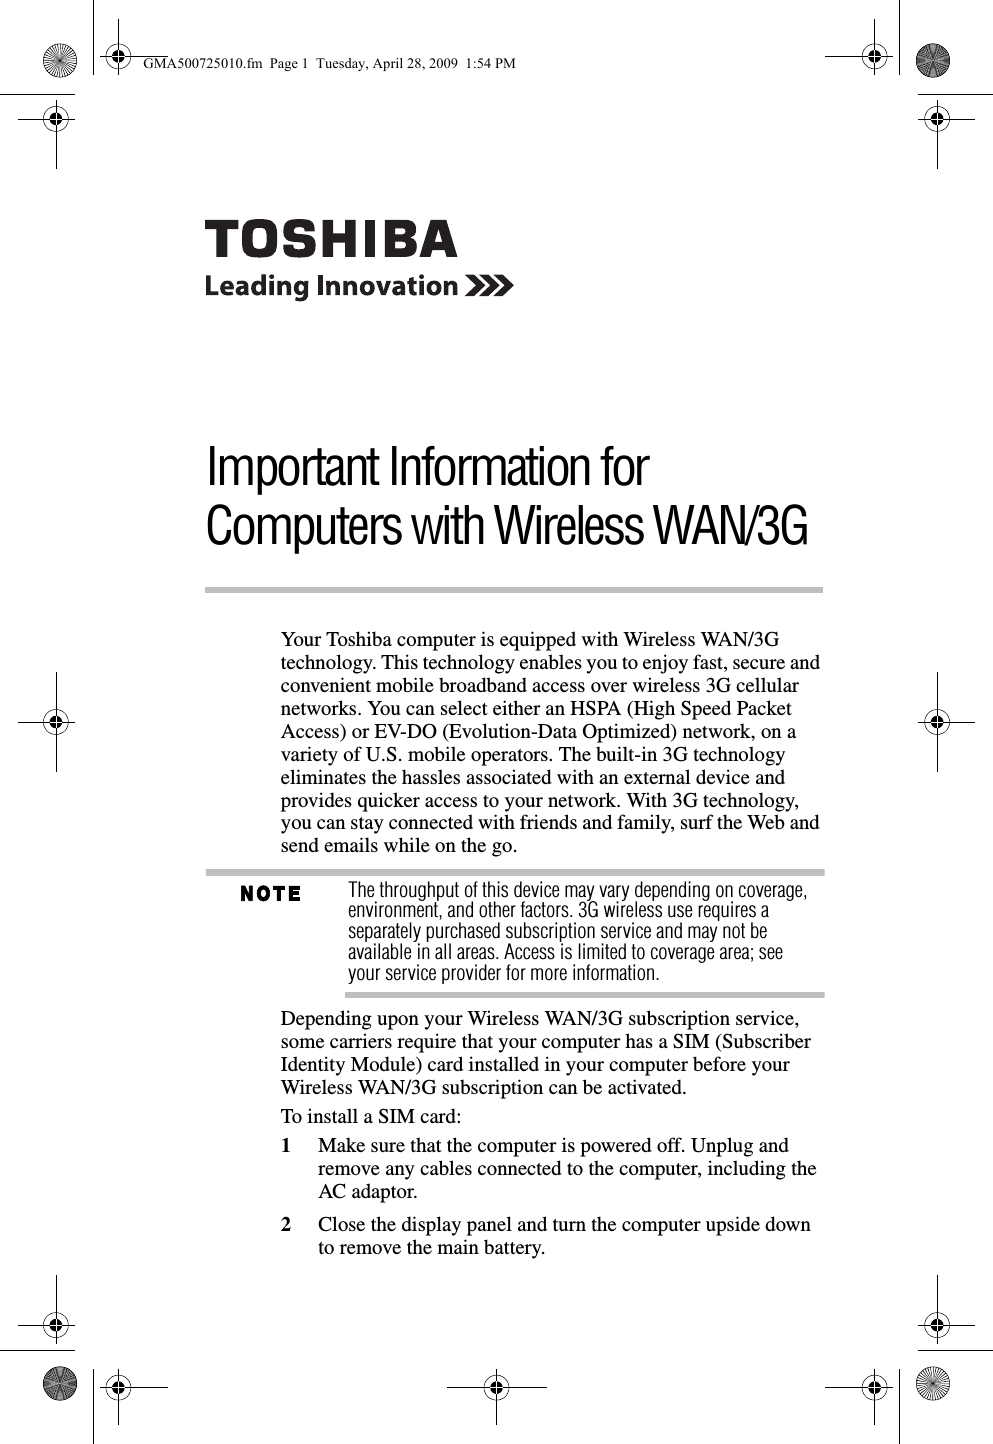 Important Information for Computers with Wireless WAN/3GYour Toshiba computer is equipped with Wireless WAN/3G technology. This technology enables you to enjoy fast, secure and convenient mobile broadband access over wireless 3G cellular networks. You can select either an HSPA (High Speed Packet Access) or EV-DO (Evolution-Data Optimized) network, on a variety of U.S. mobile operators. The built-in 3G technology eliminates the hassles associated with an external device and provides quicker access to your network. With 3G technology, you can stay connected with friends and family, surf the Web and send emails while on the go.The throughput of this device may vary depending on coverage, environment, and other factors. 3G wireless use requires a separately purchased subscription service and may not be available in all areas. Access is limited to coverage area; see your service provider for more information.Depending upon your Wireless WAN/3G subscription service, some carriers require that your computer has a SIM (Subscriber Identity Module) card installed in your computer before your Wireless WAN/3G subscription can be activated.To install a SIM card:1Make sure that the computer is powered off. Unplug and remove any cables connected to the computer, including the AC adaptor.2Close the display panel and turn the computer upside down to remove the main battery.GMA500725010.fm  Page 1  Tuesday, April 28, 2009  1:54 PM